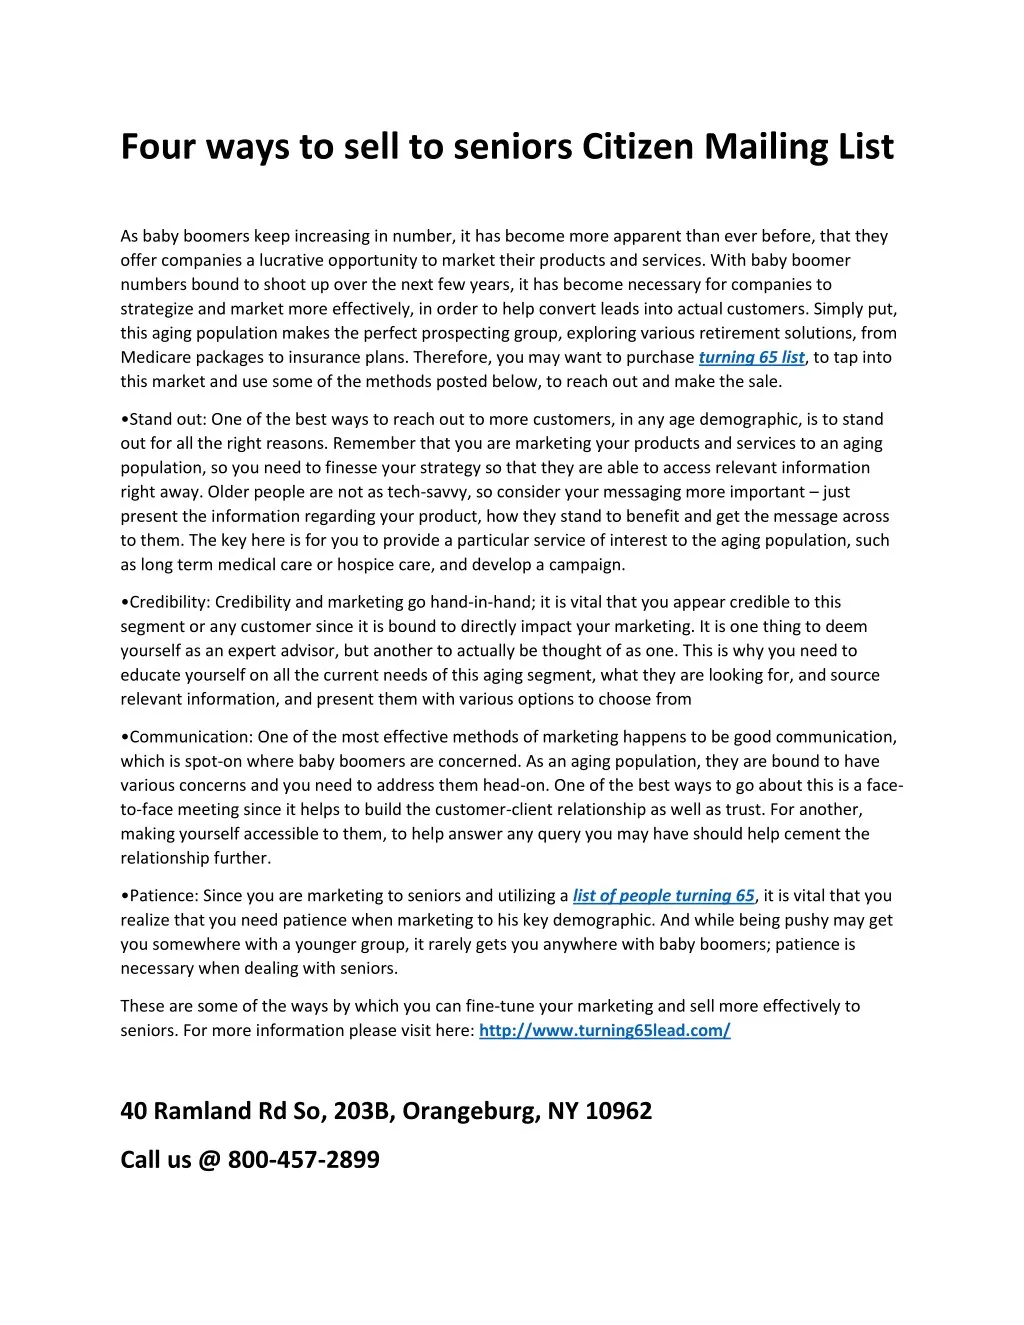 four ways to sell to seniors citizen mailing list